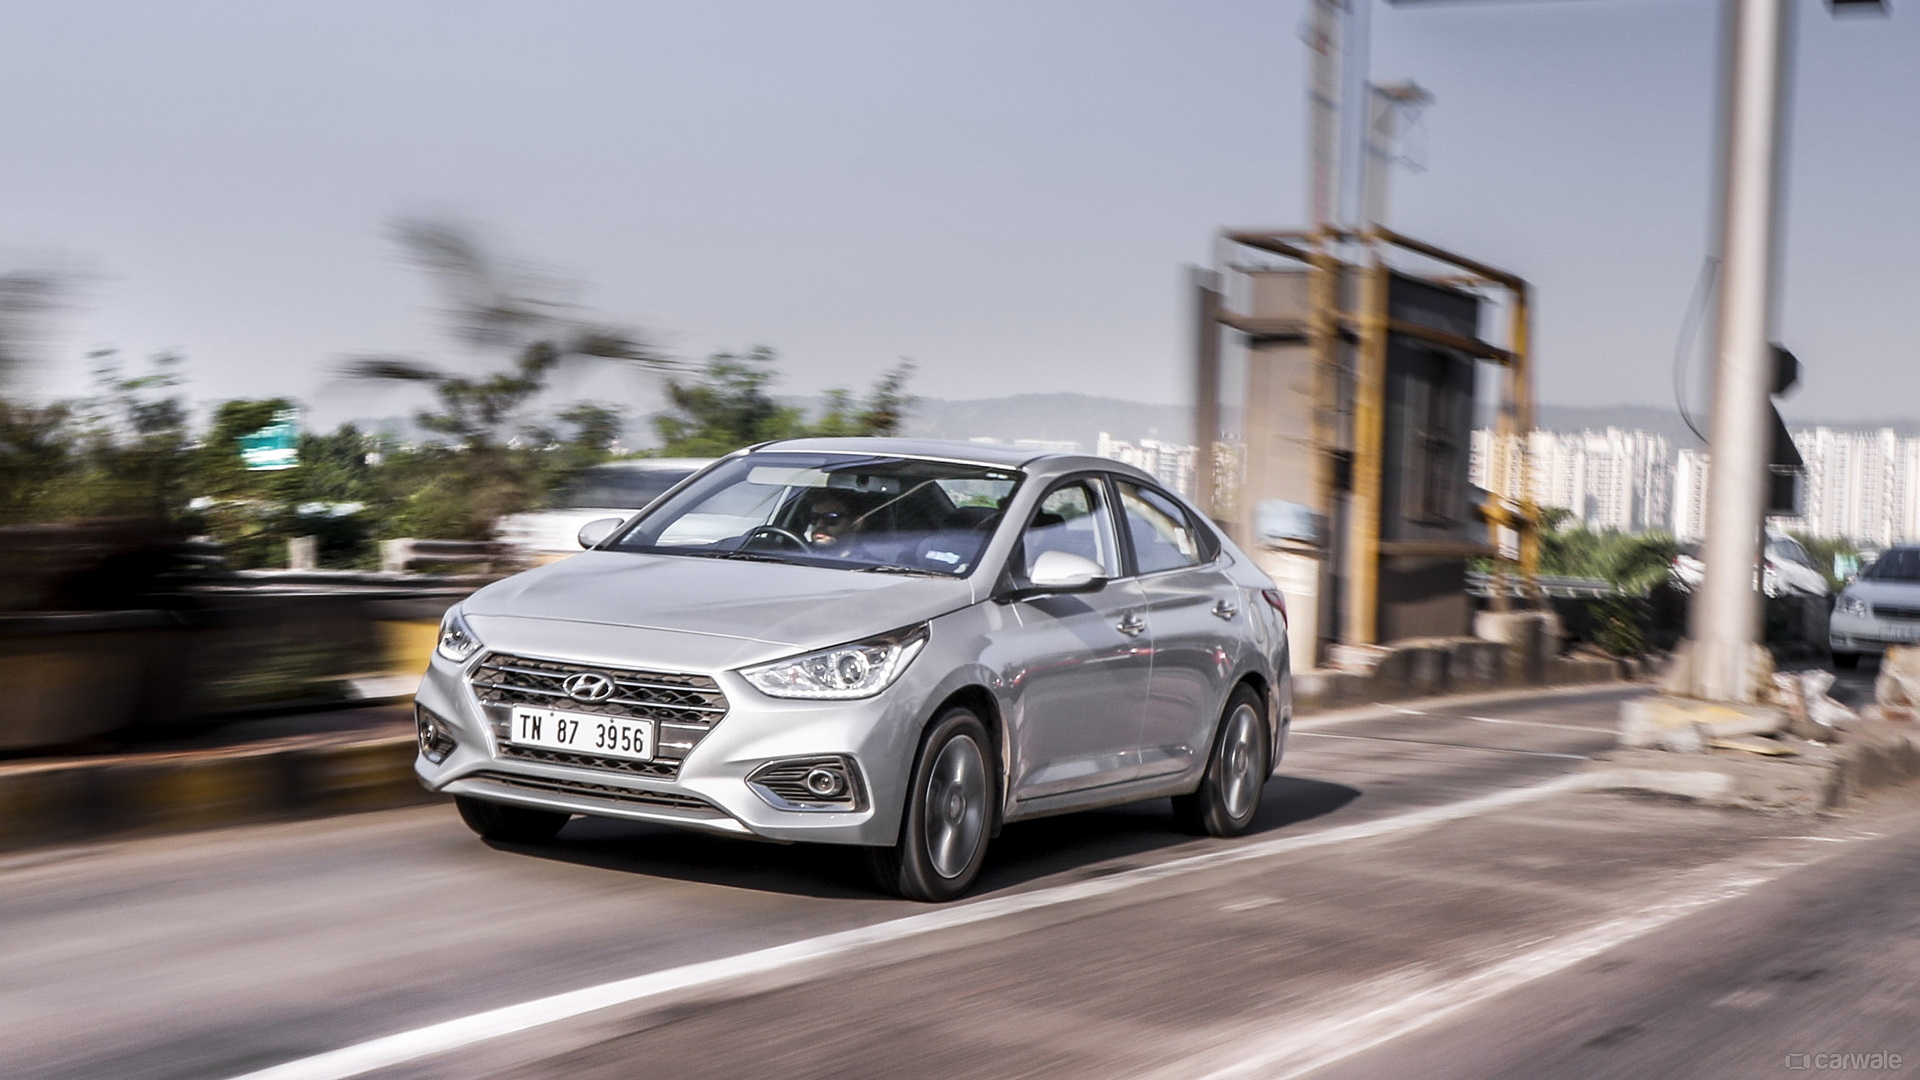 Hyundai Verna [2017-2020] Images - Interior & Exterior Photo Gallery [150+  Images] - CarWale